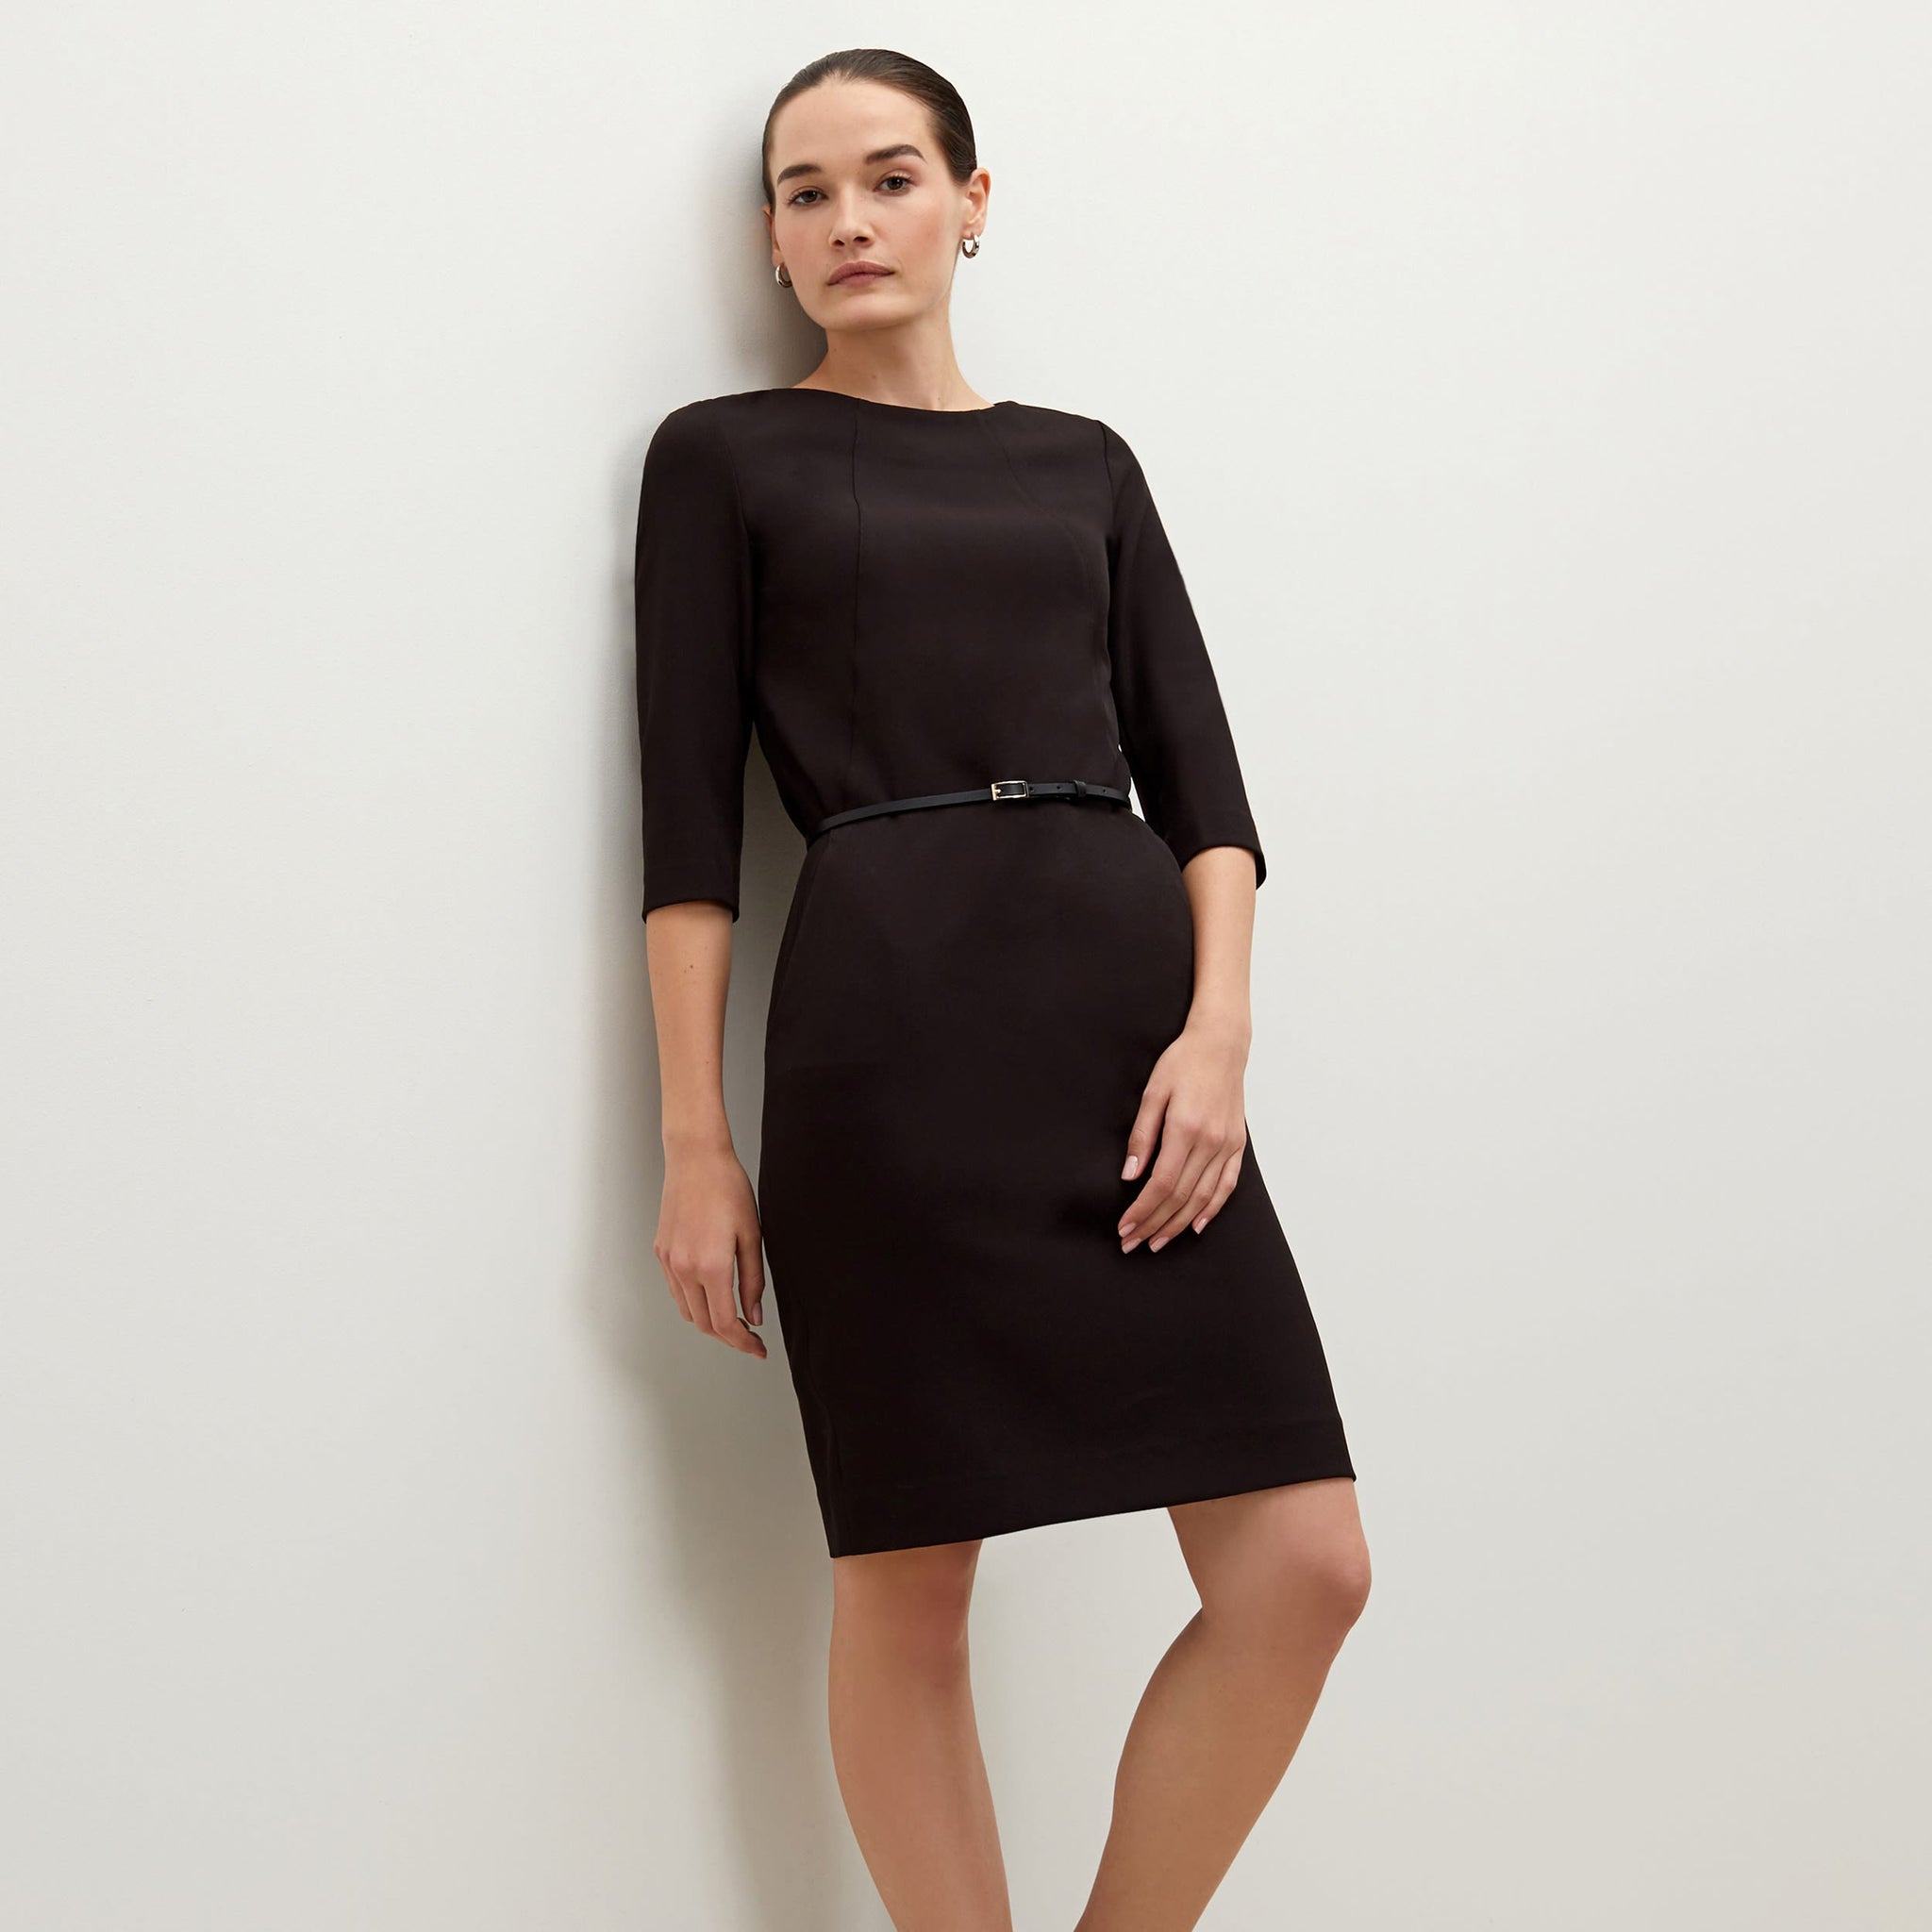 Side image of a woman standing wearing the Etsuko dress in black